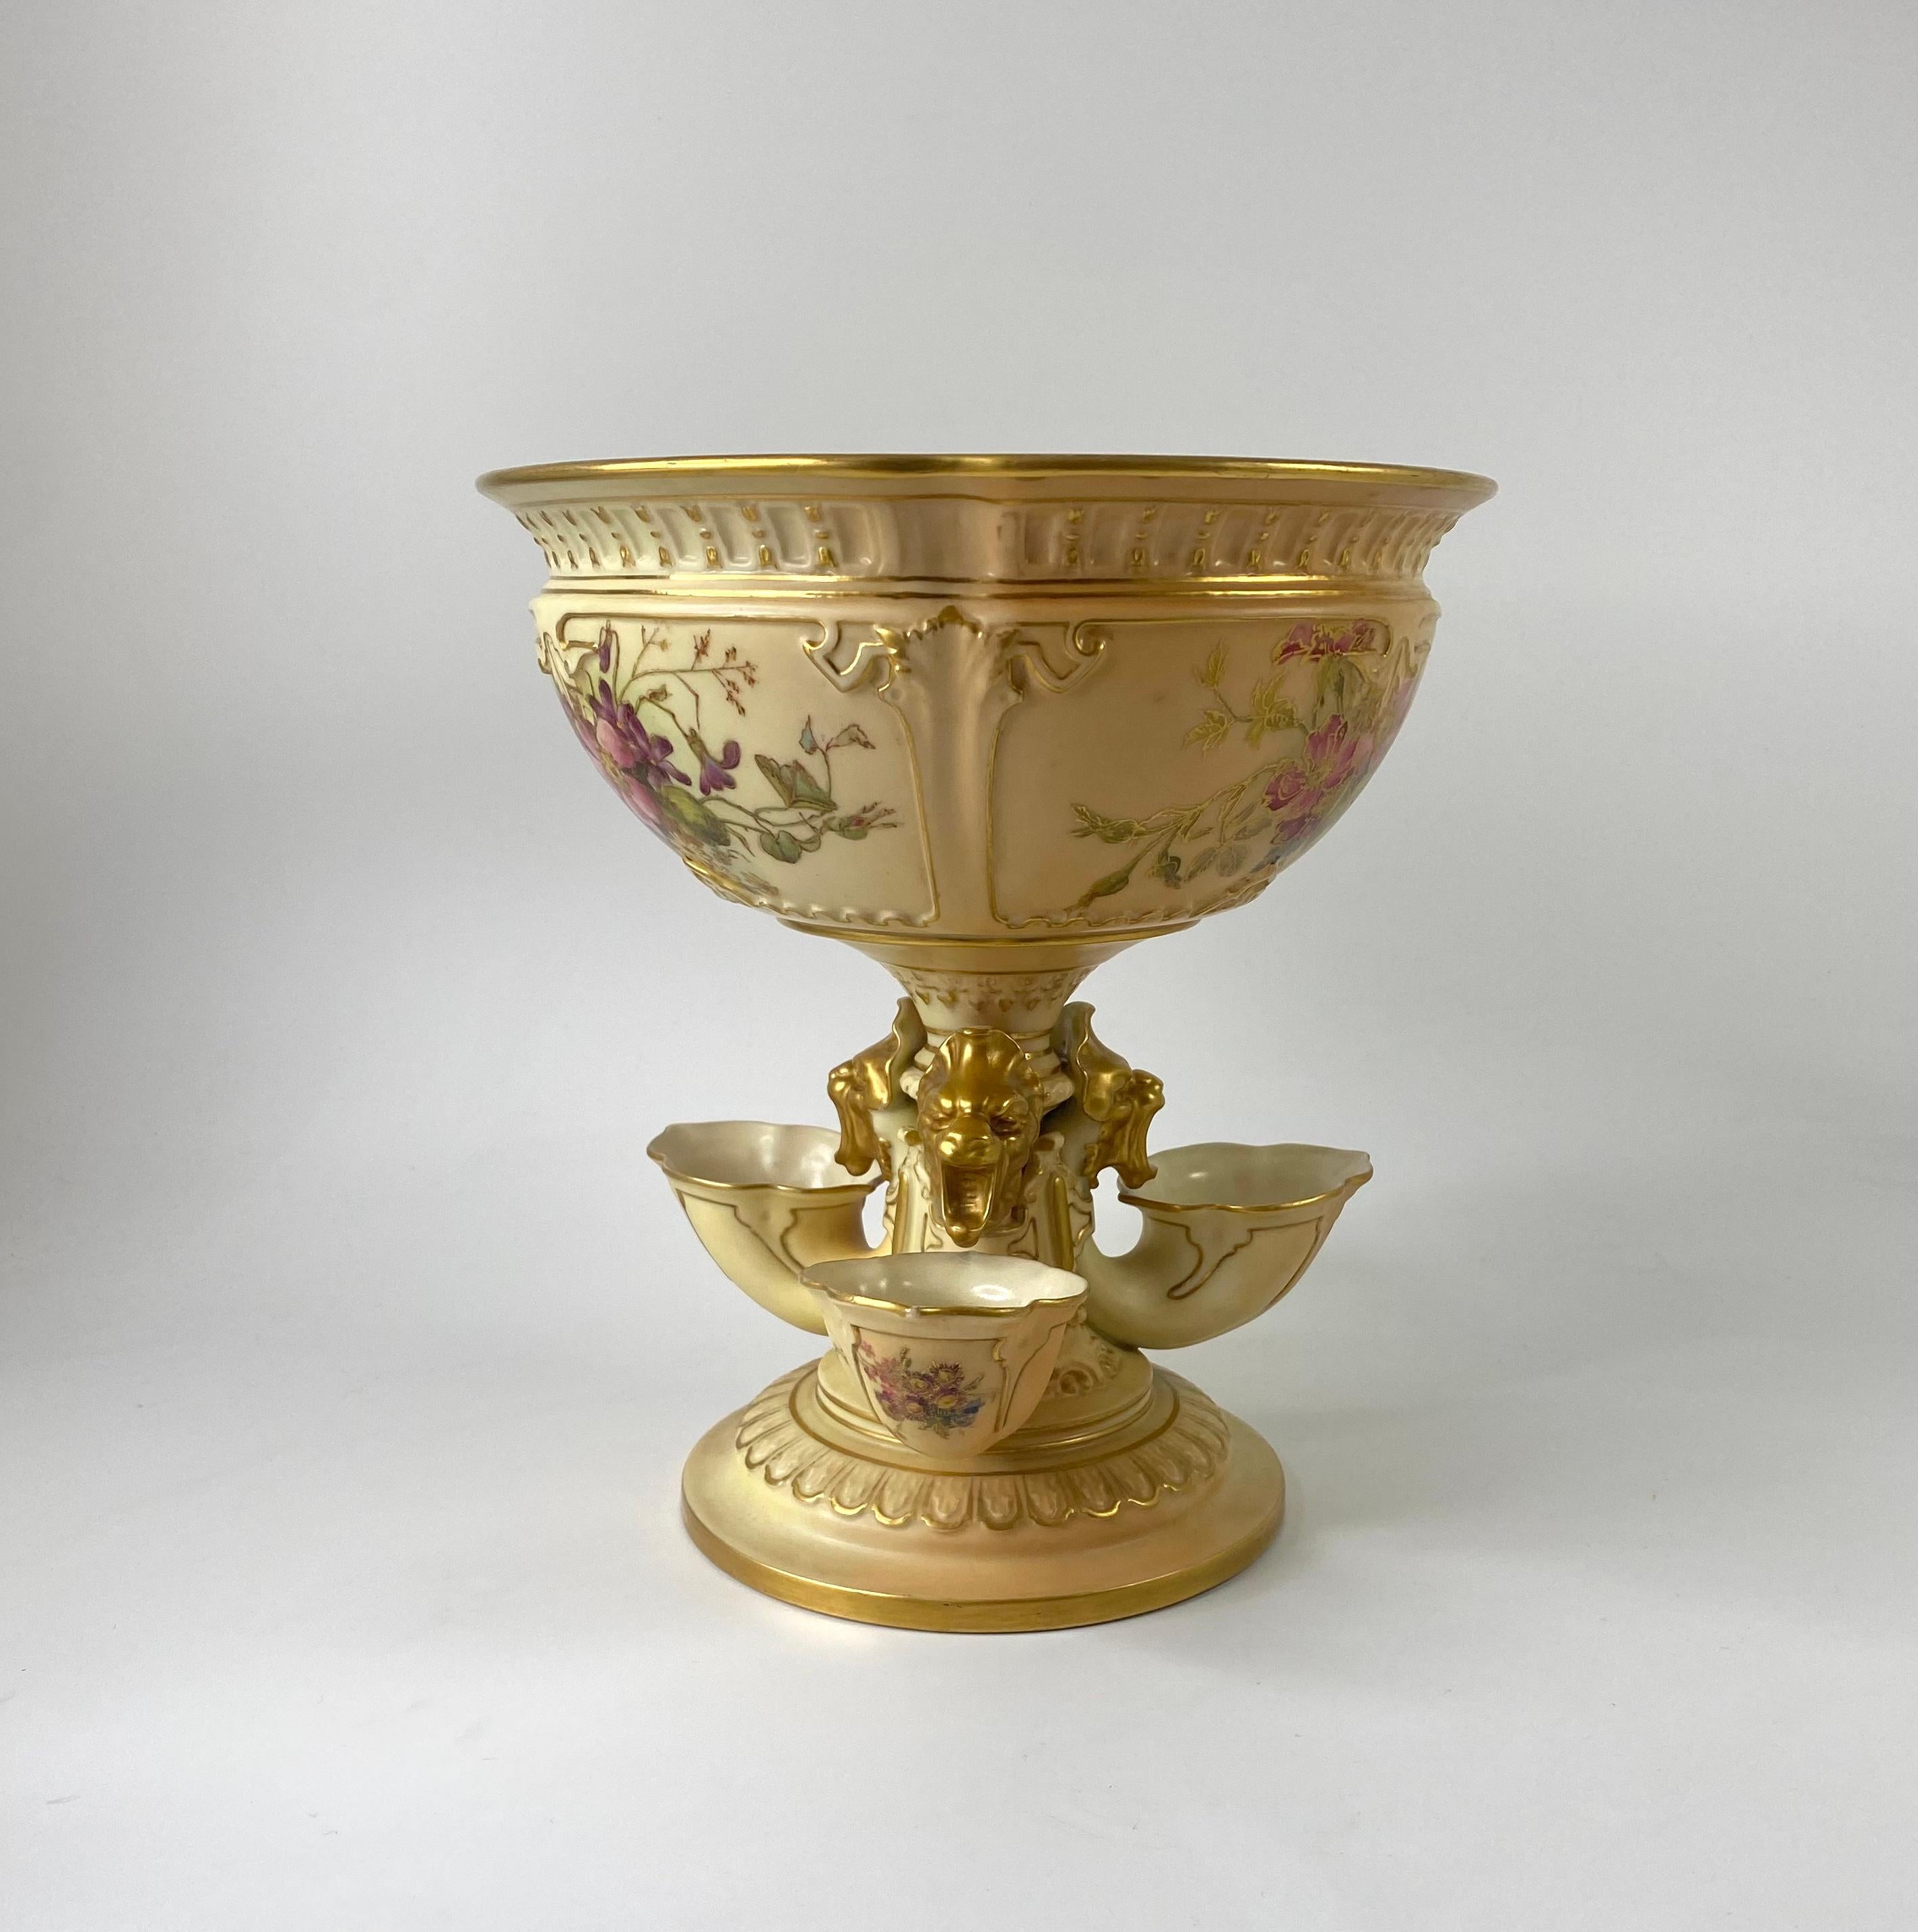 A large Royal Worcester porcelain ‘Flower Bowl’, dated 1912. The ‘Blush ivory’ decorated bowl modelled in Renaissance style, as a large bowl set upon a pedestal, with three gilt decorated grotesque masks, over three cornucopia, above a moulded